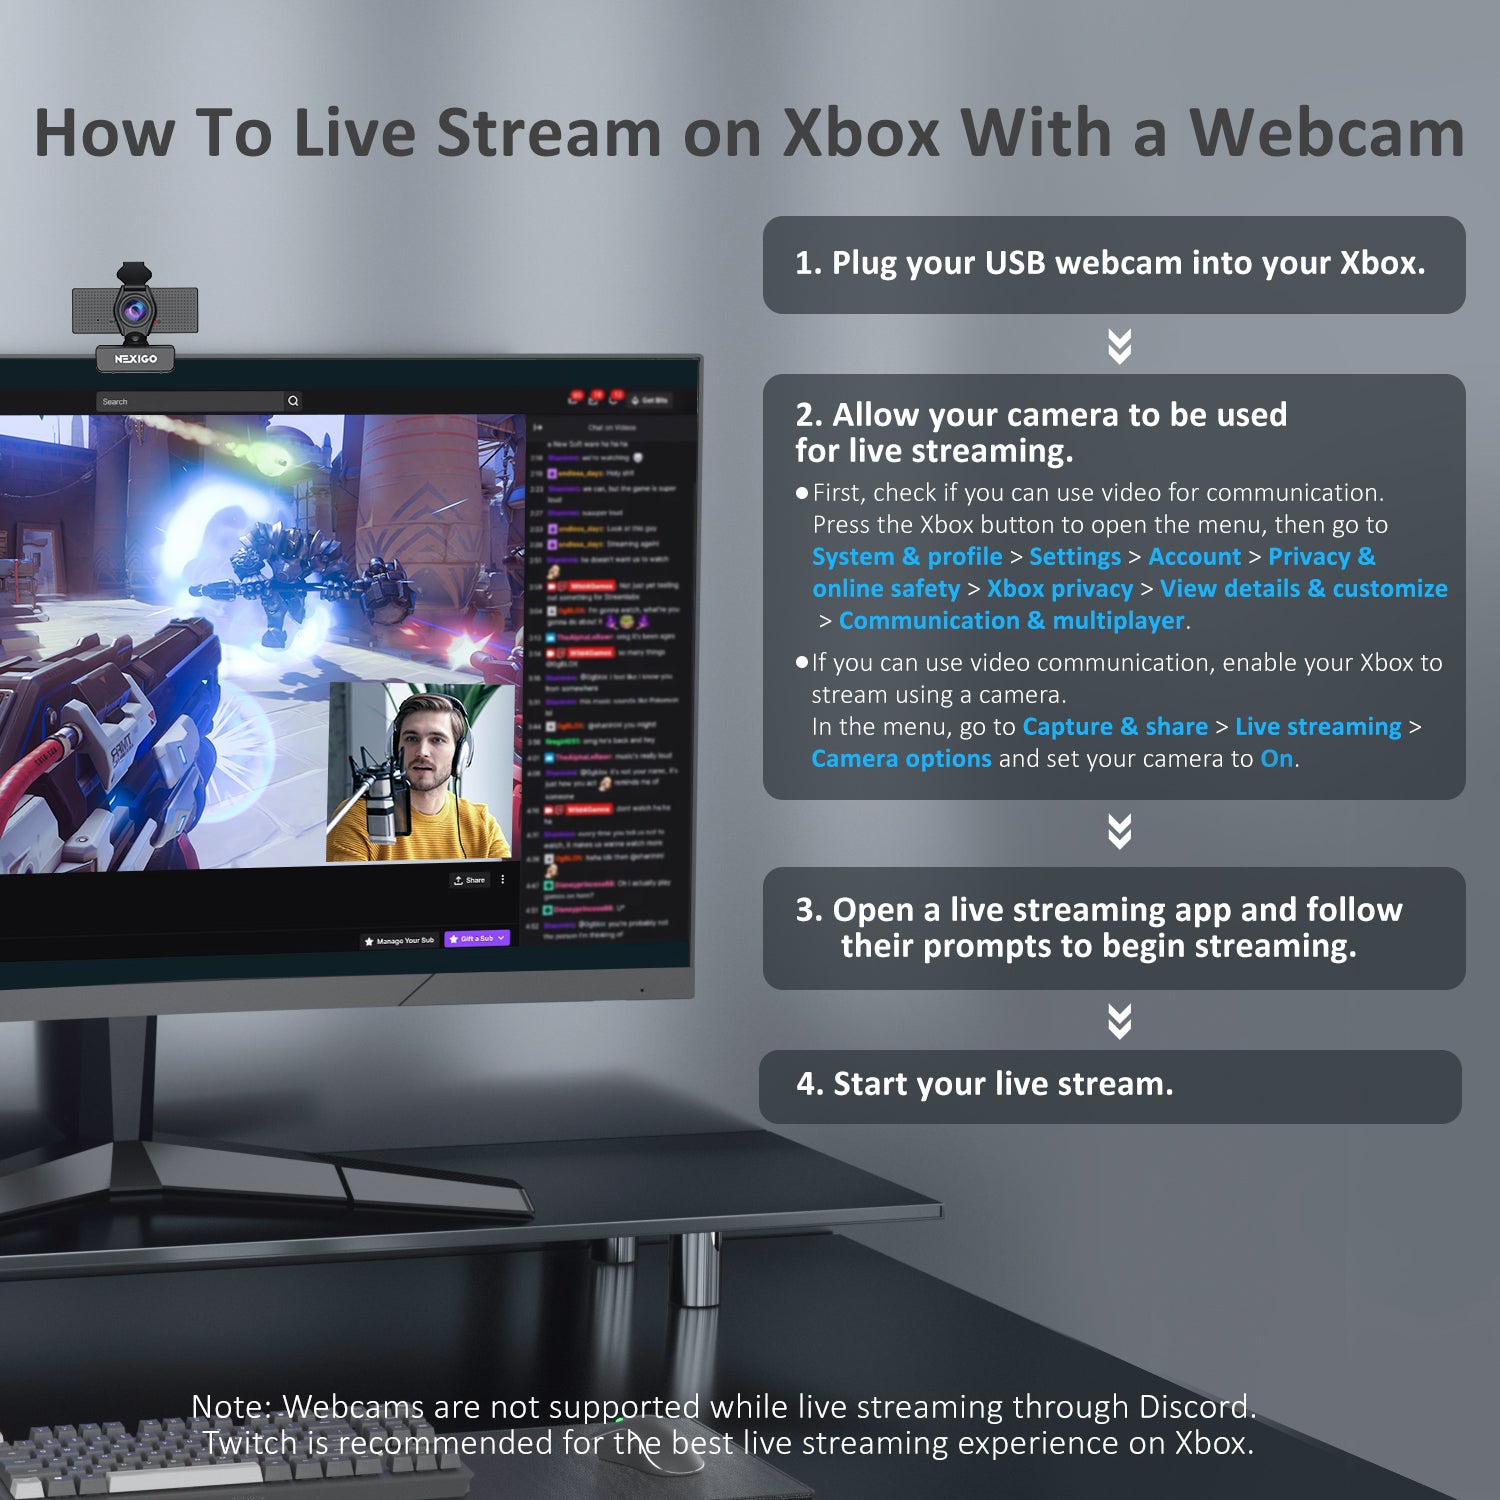 how to live stream on Xbox with a webcam